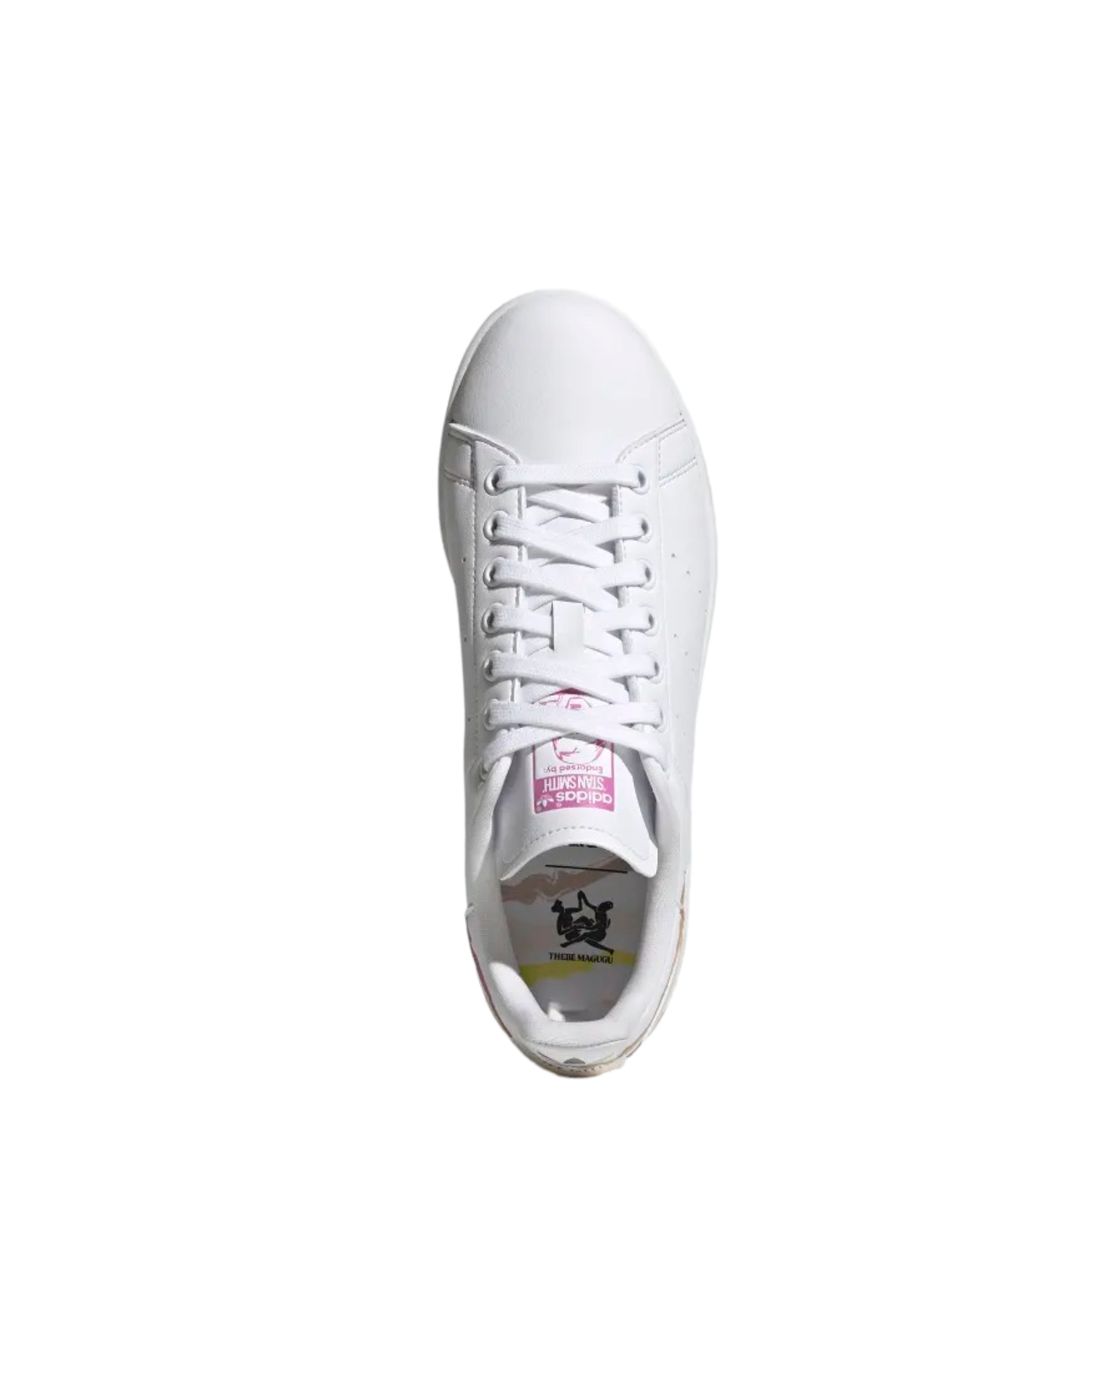 Shoes for woman GY9560 STAN SMITH TM W ADIDAS ORIGINALS